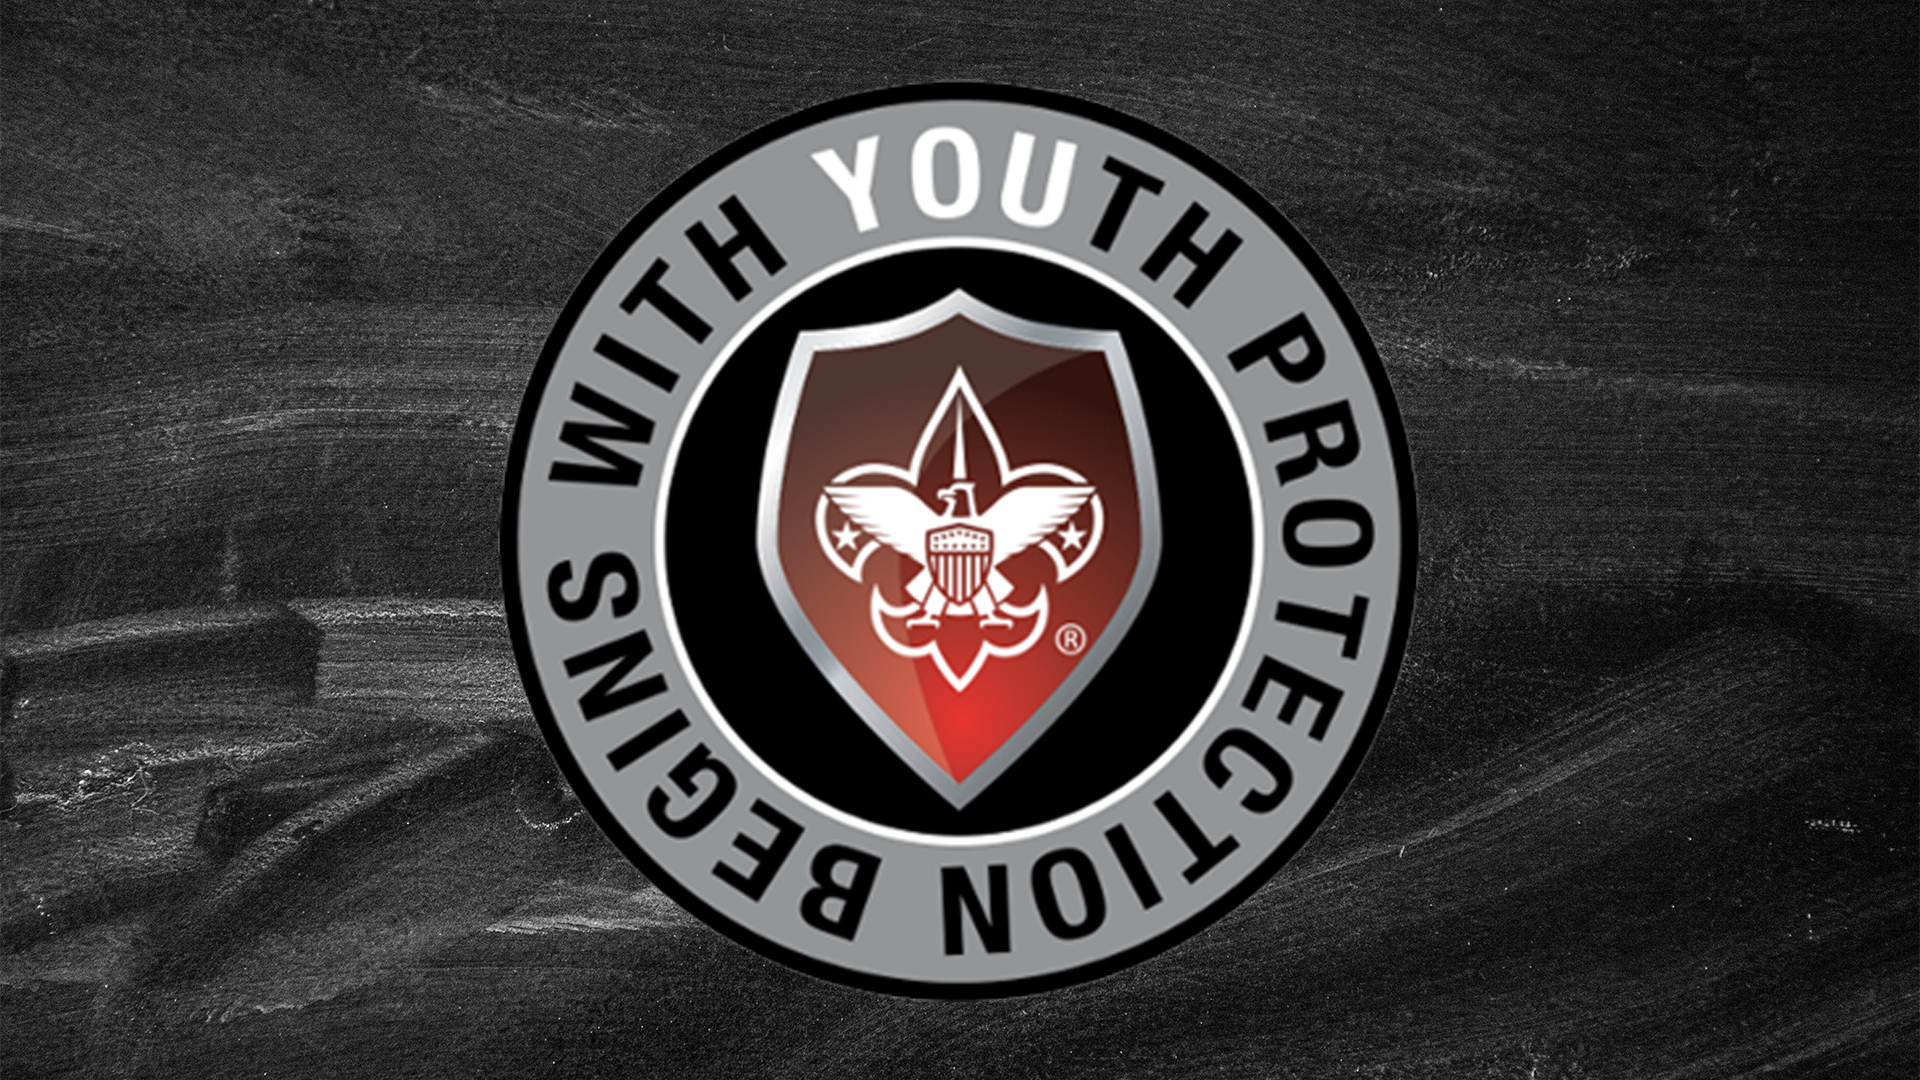 A circle saying "Youth Protection Begins with You" (the you in youth and at the end connect back together) with the BSA logo in a red shield in the center.